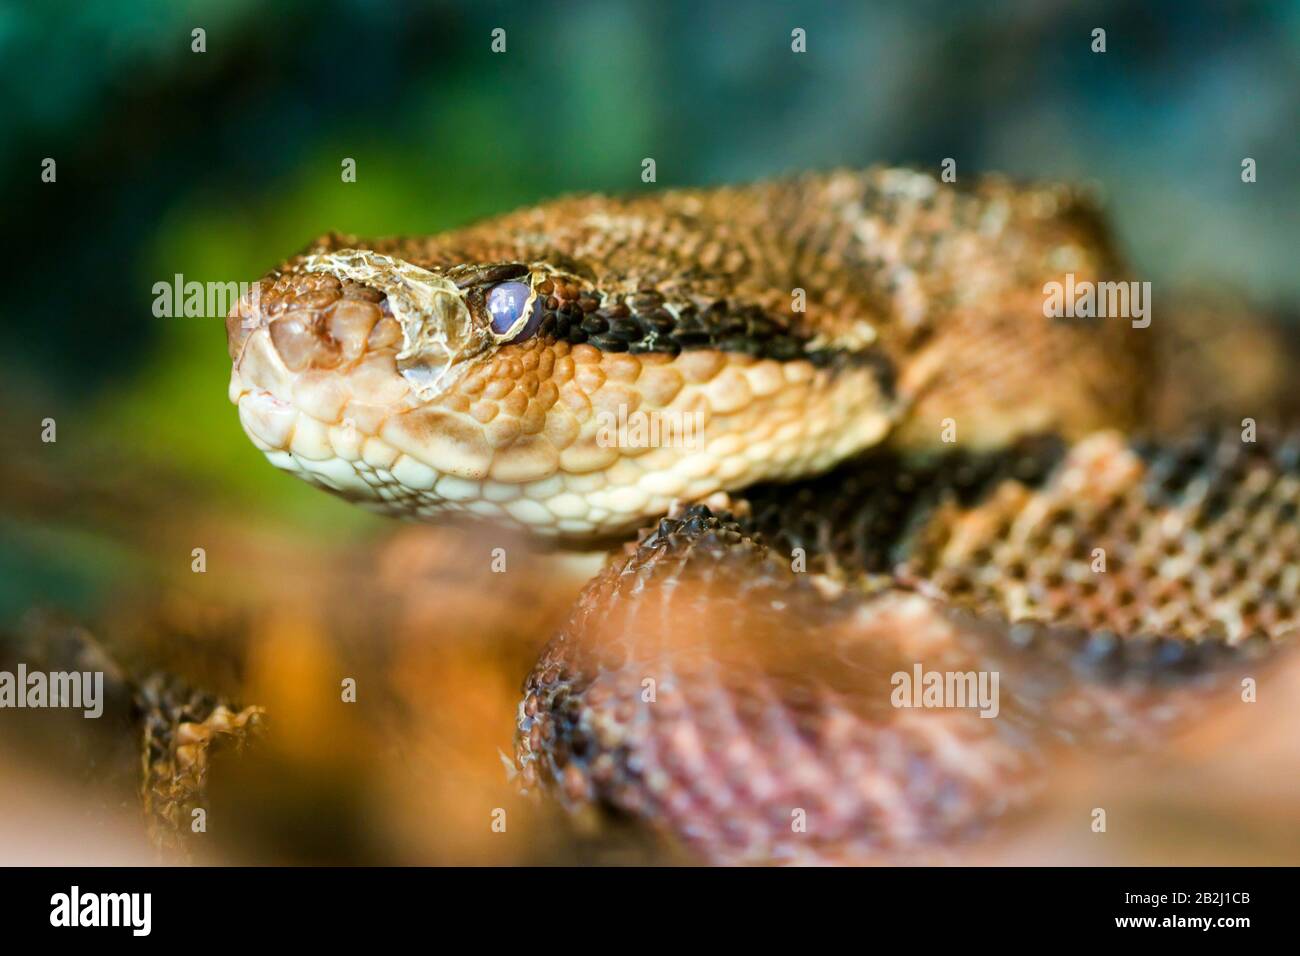 Bothrops Atrox Shot From The Ground Level Shallow Depth Of Field The Most Dangerous Snake In South America Stock Photo